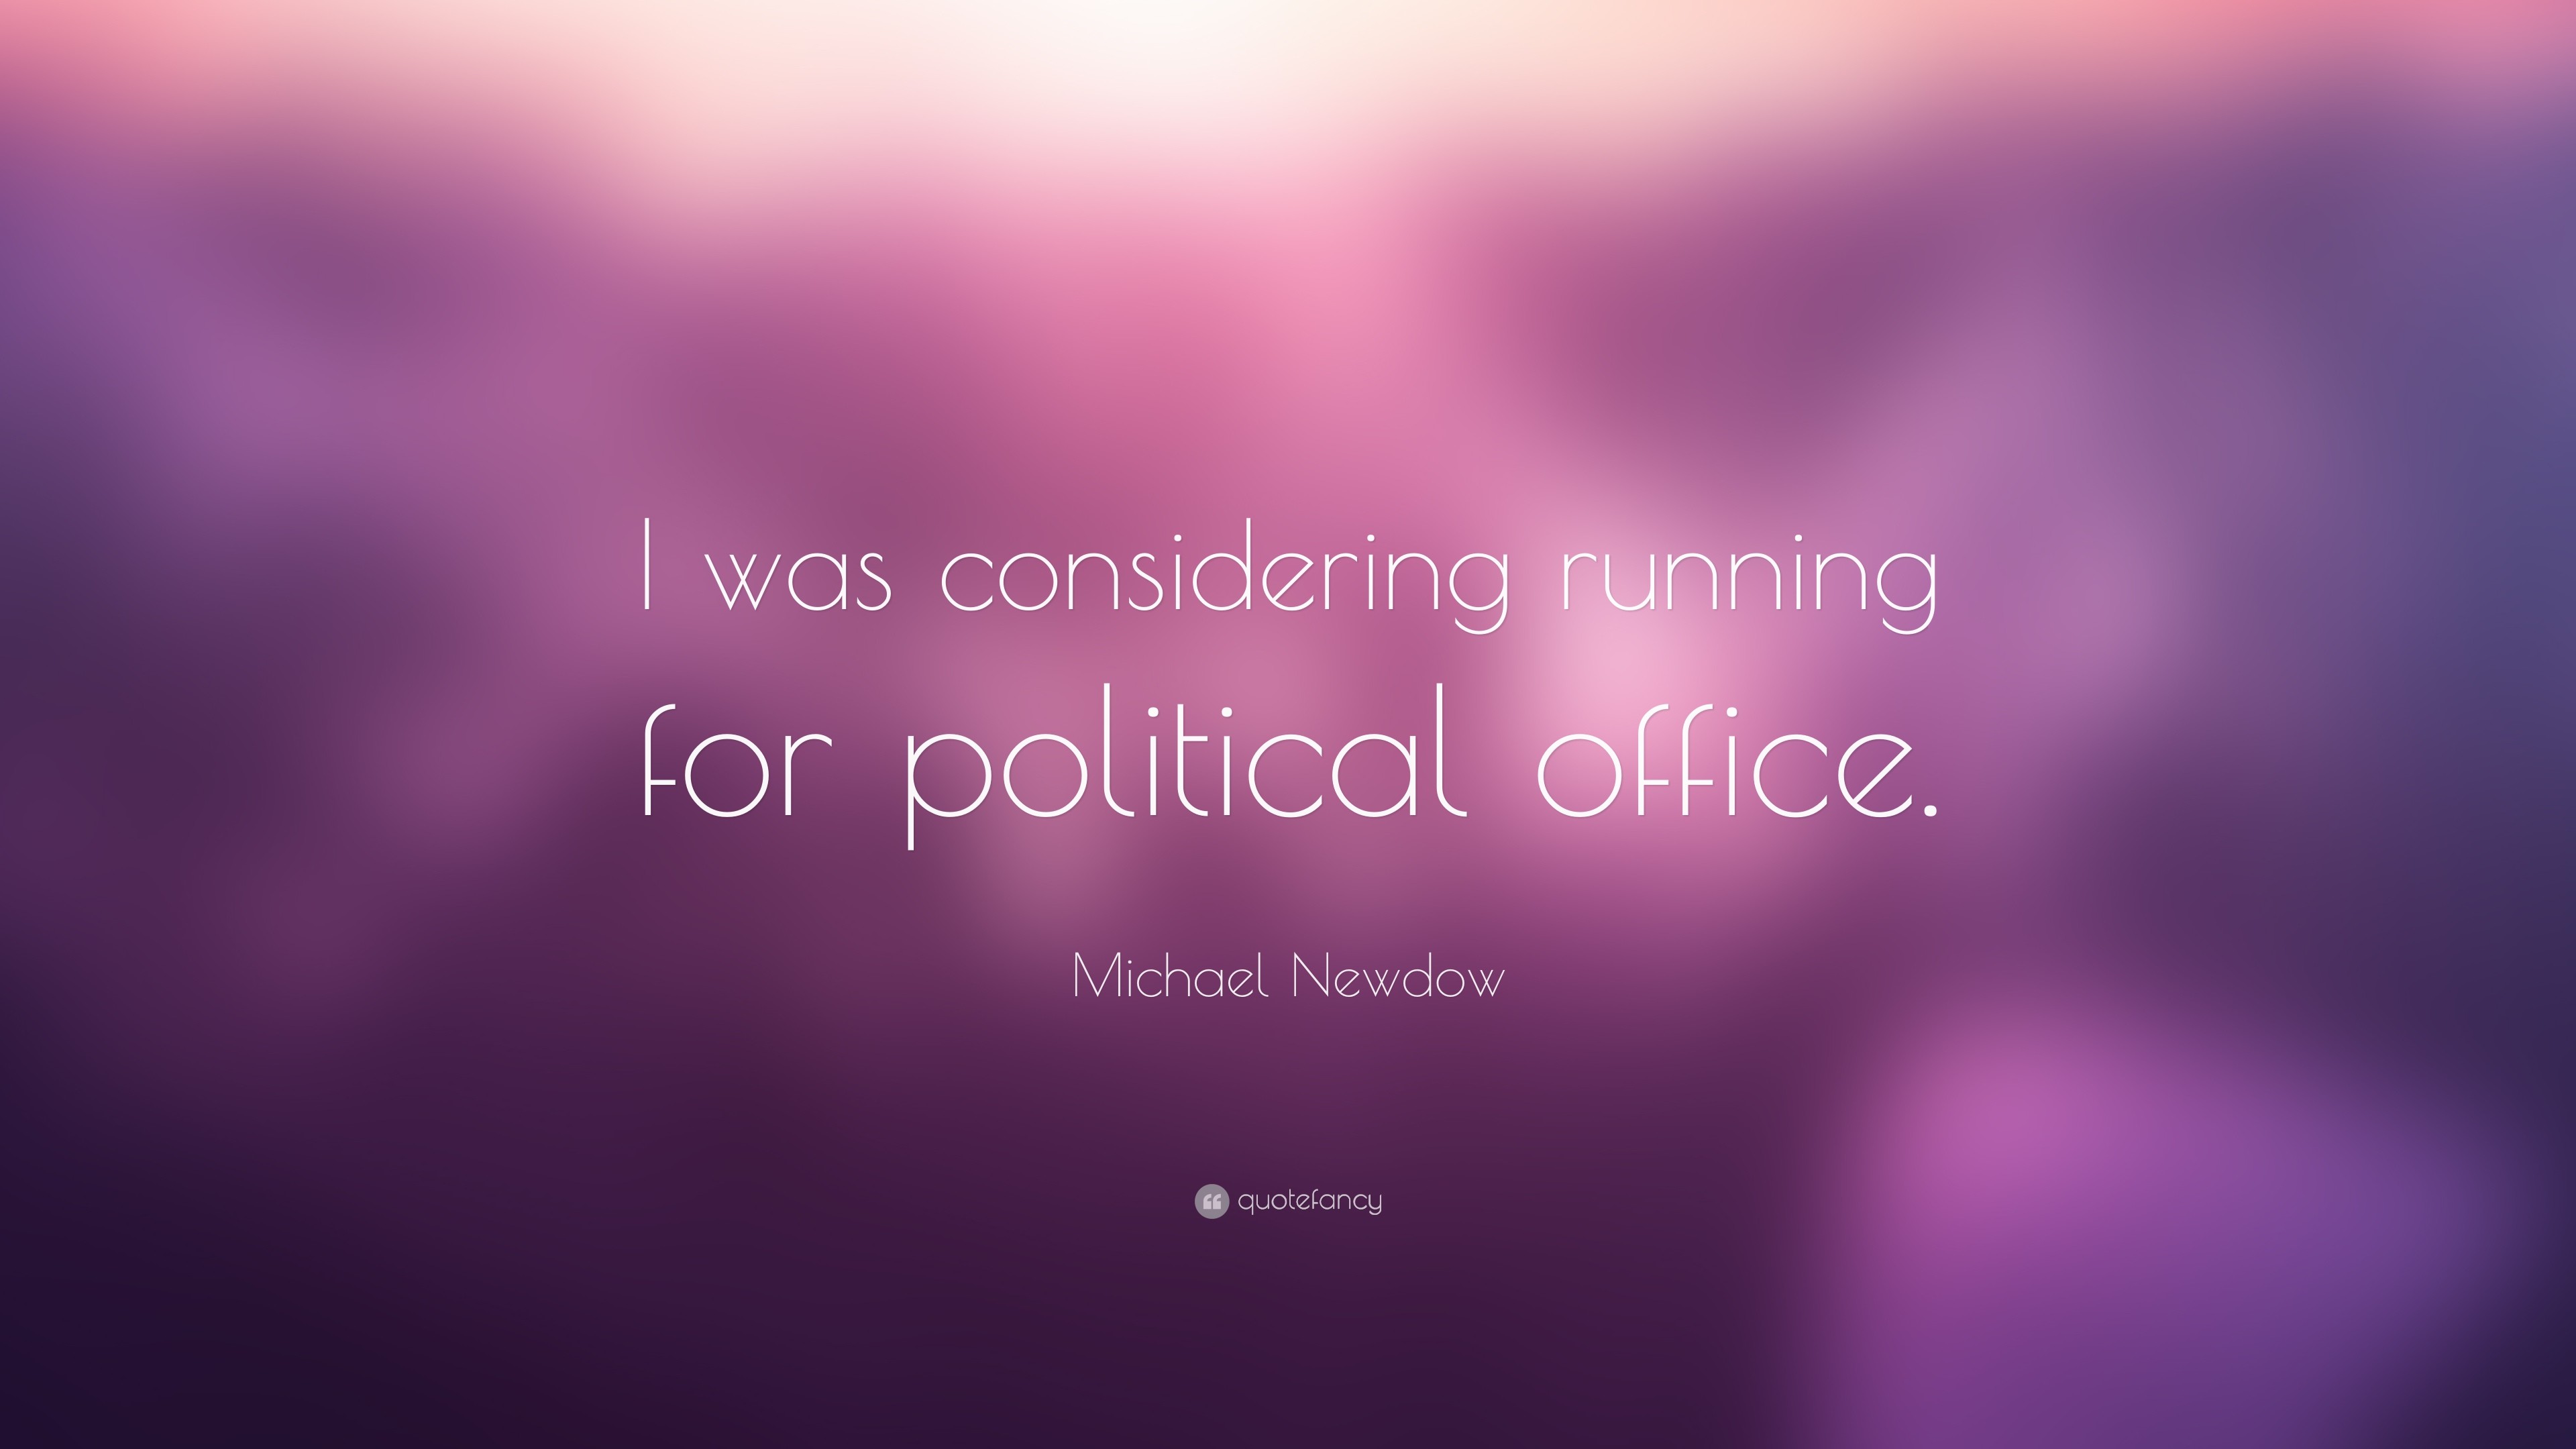 3840x2160 Michael Newdow Quote: “I was considering running for political office.”